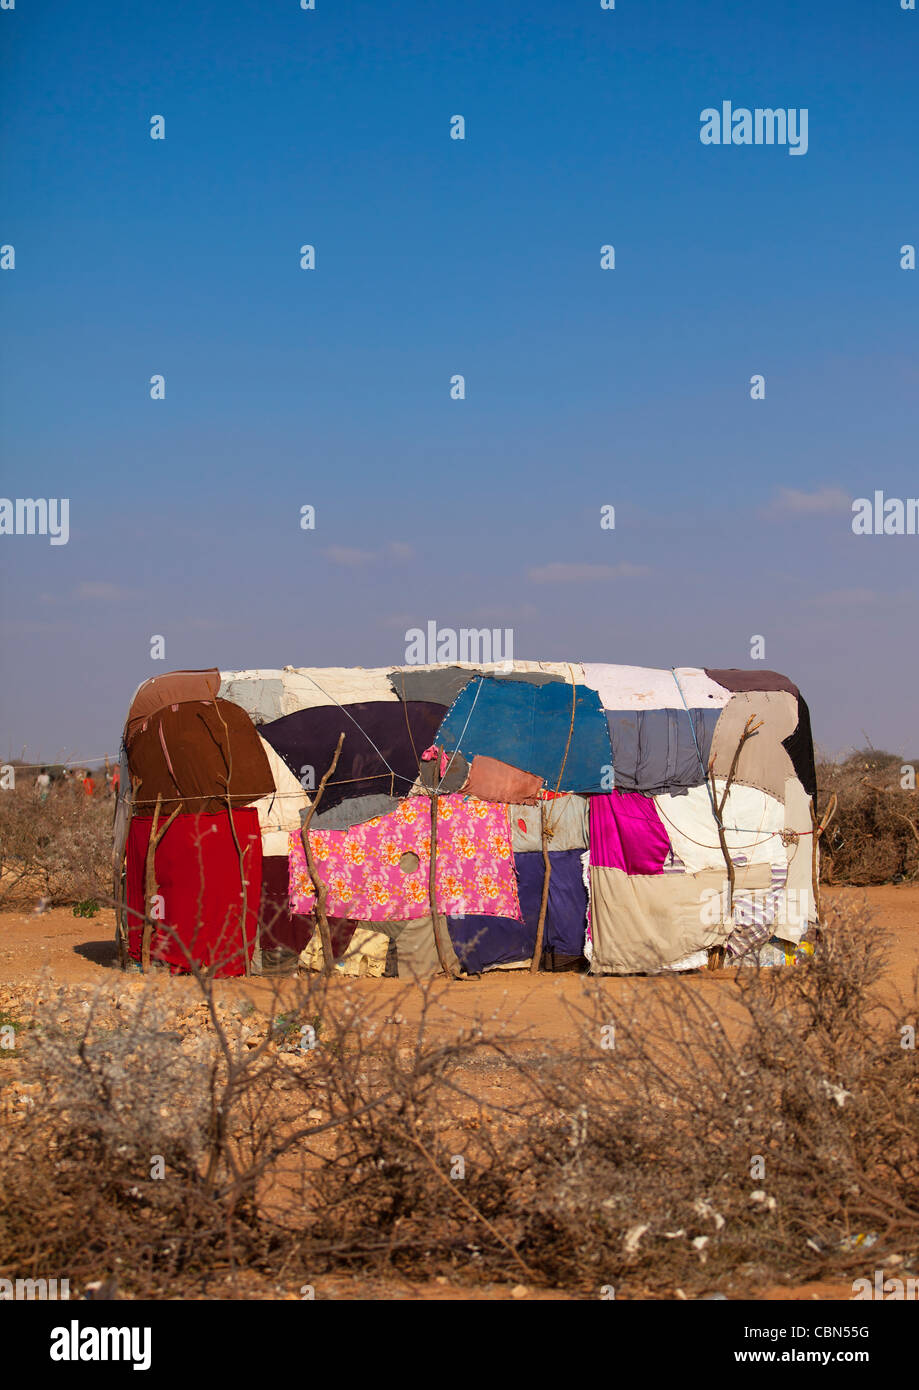 A Patchwork Hut In Baligubadle Somaliland Stock Photo